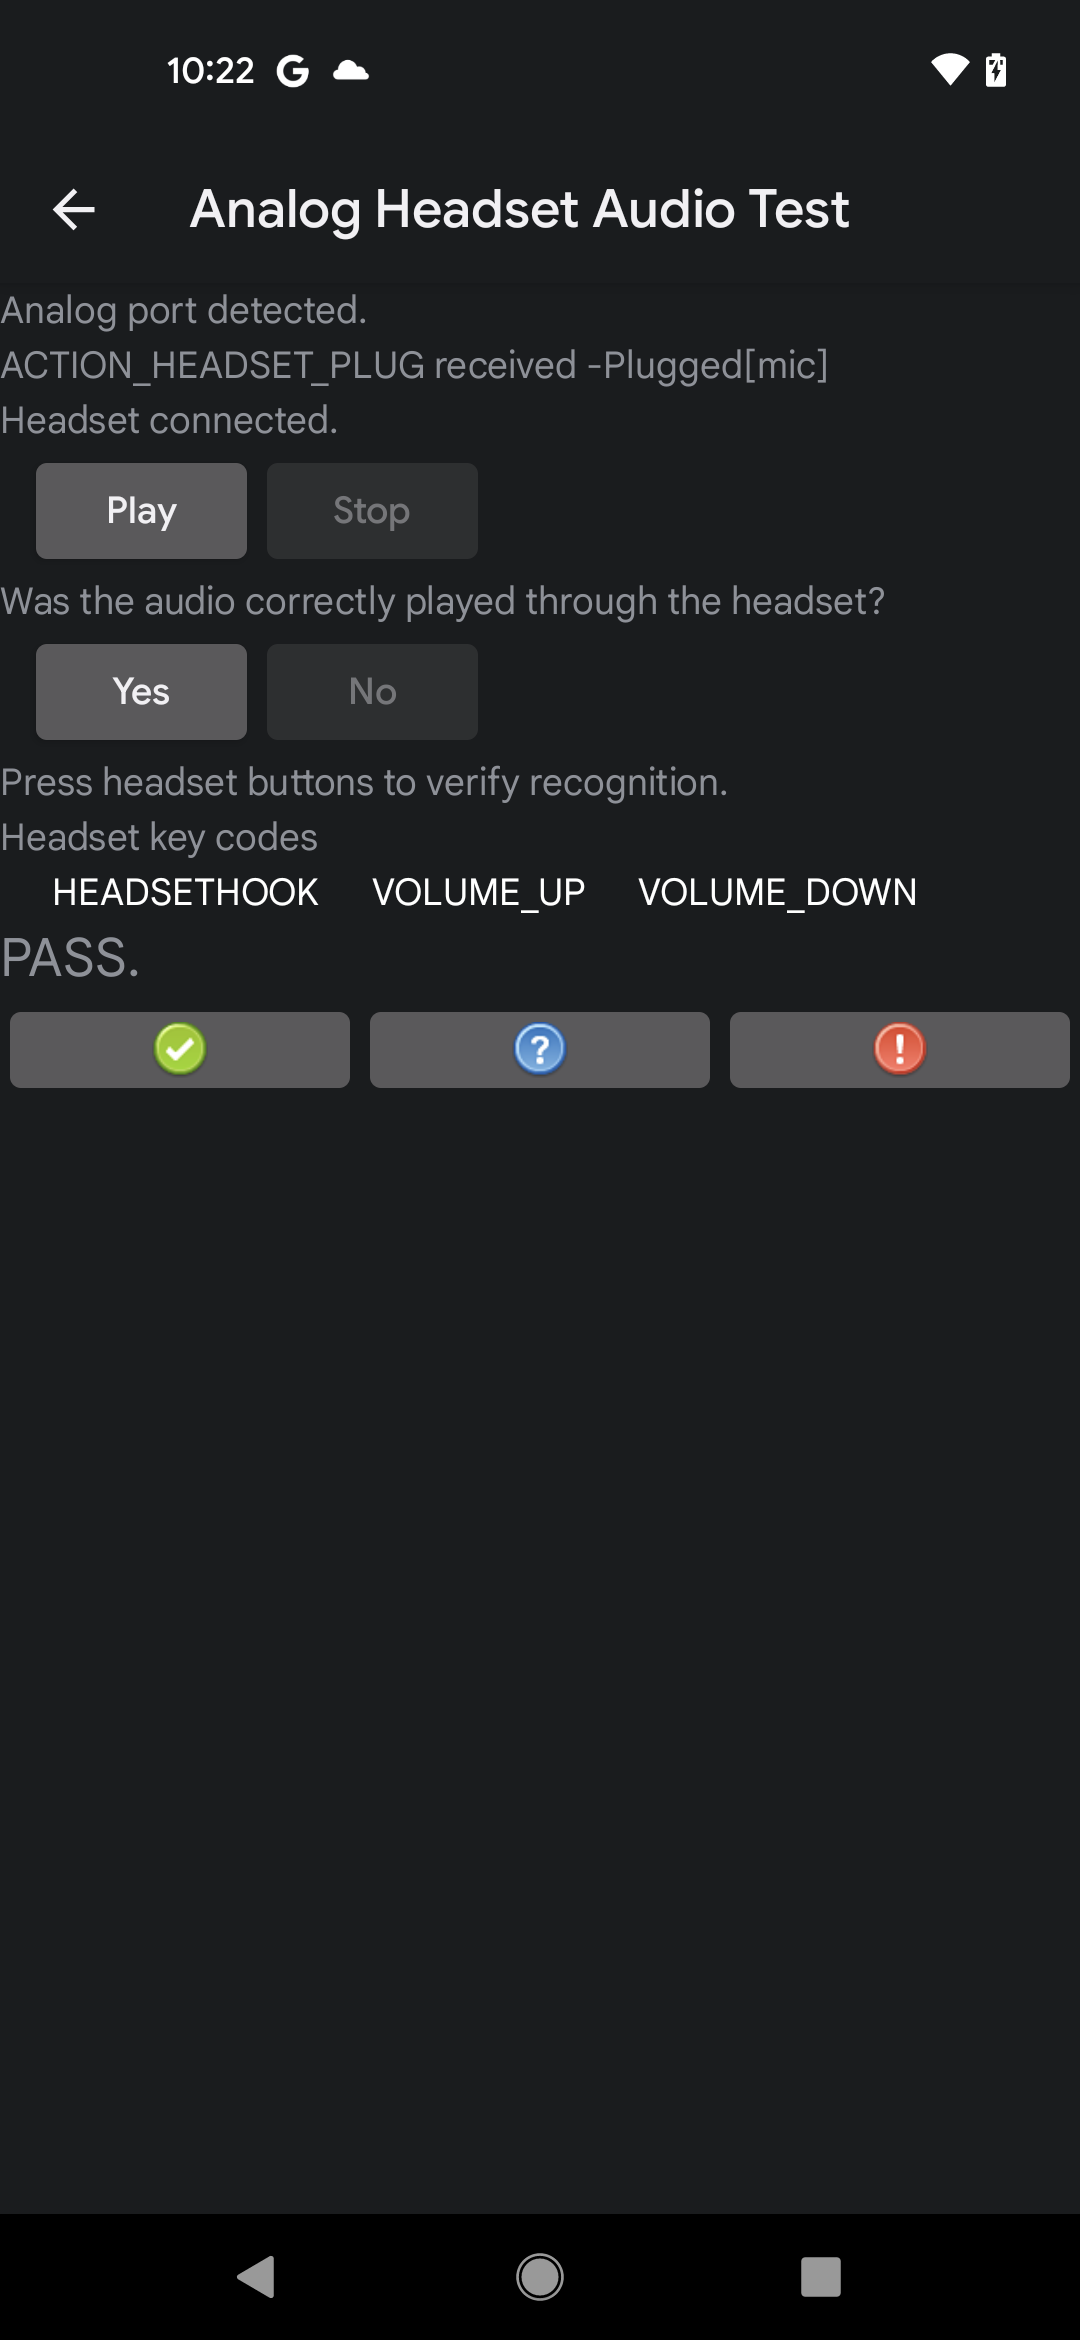 UI for a passed test